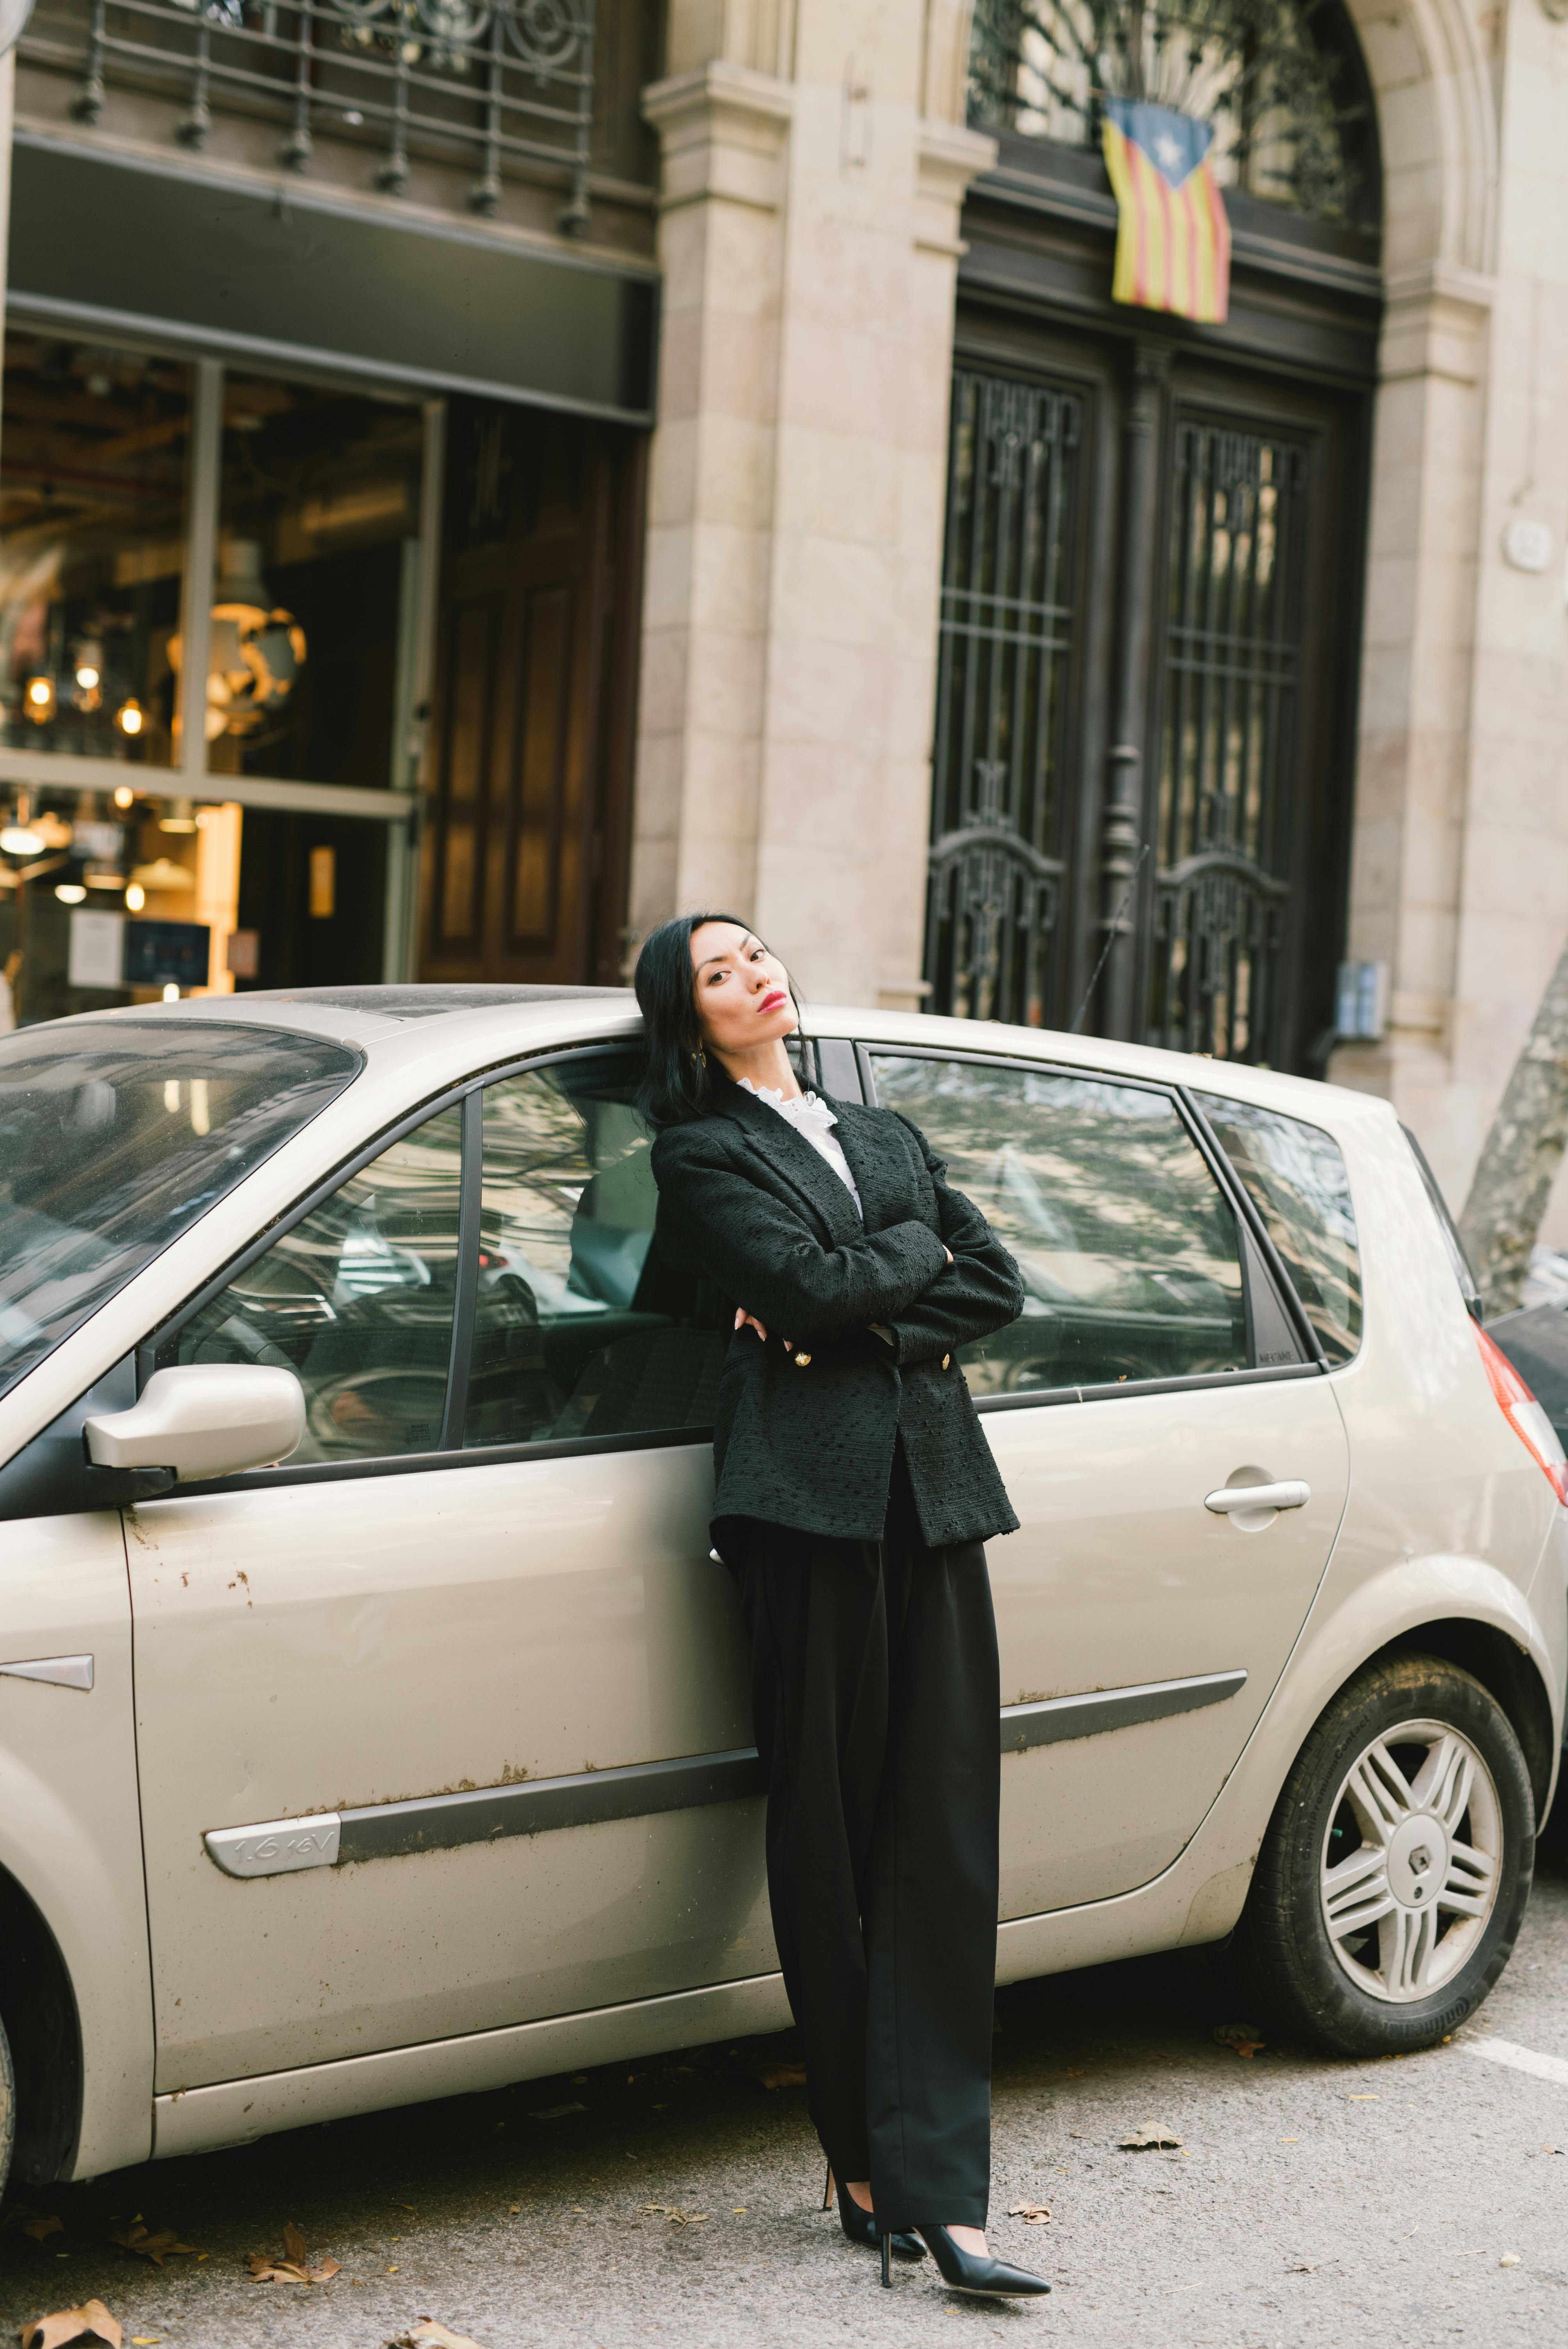 A woman standing by a car | Source: Pexels